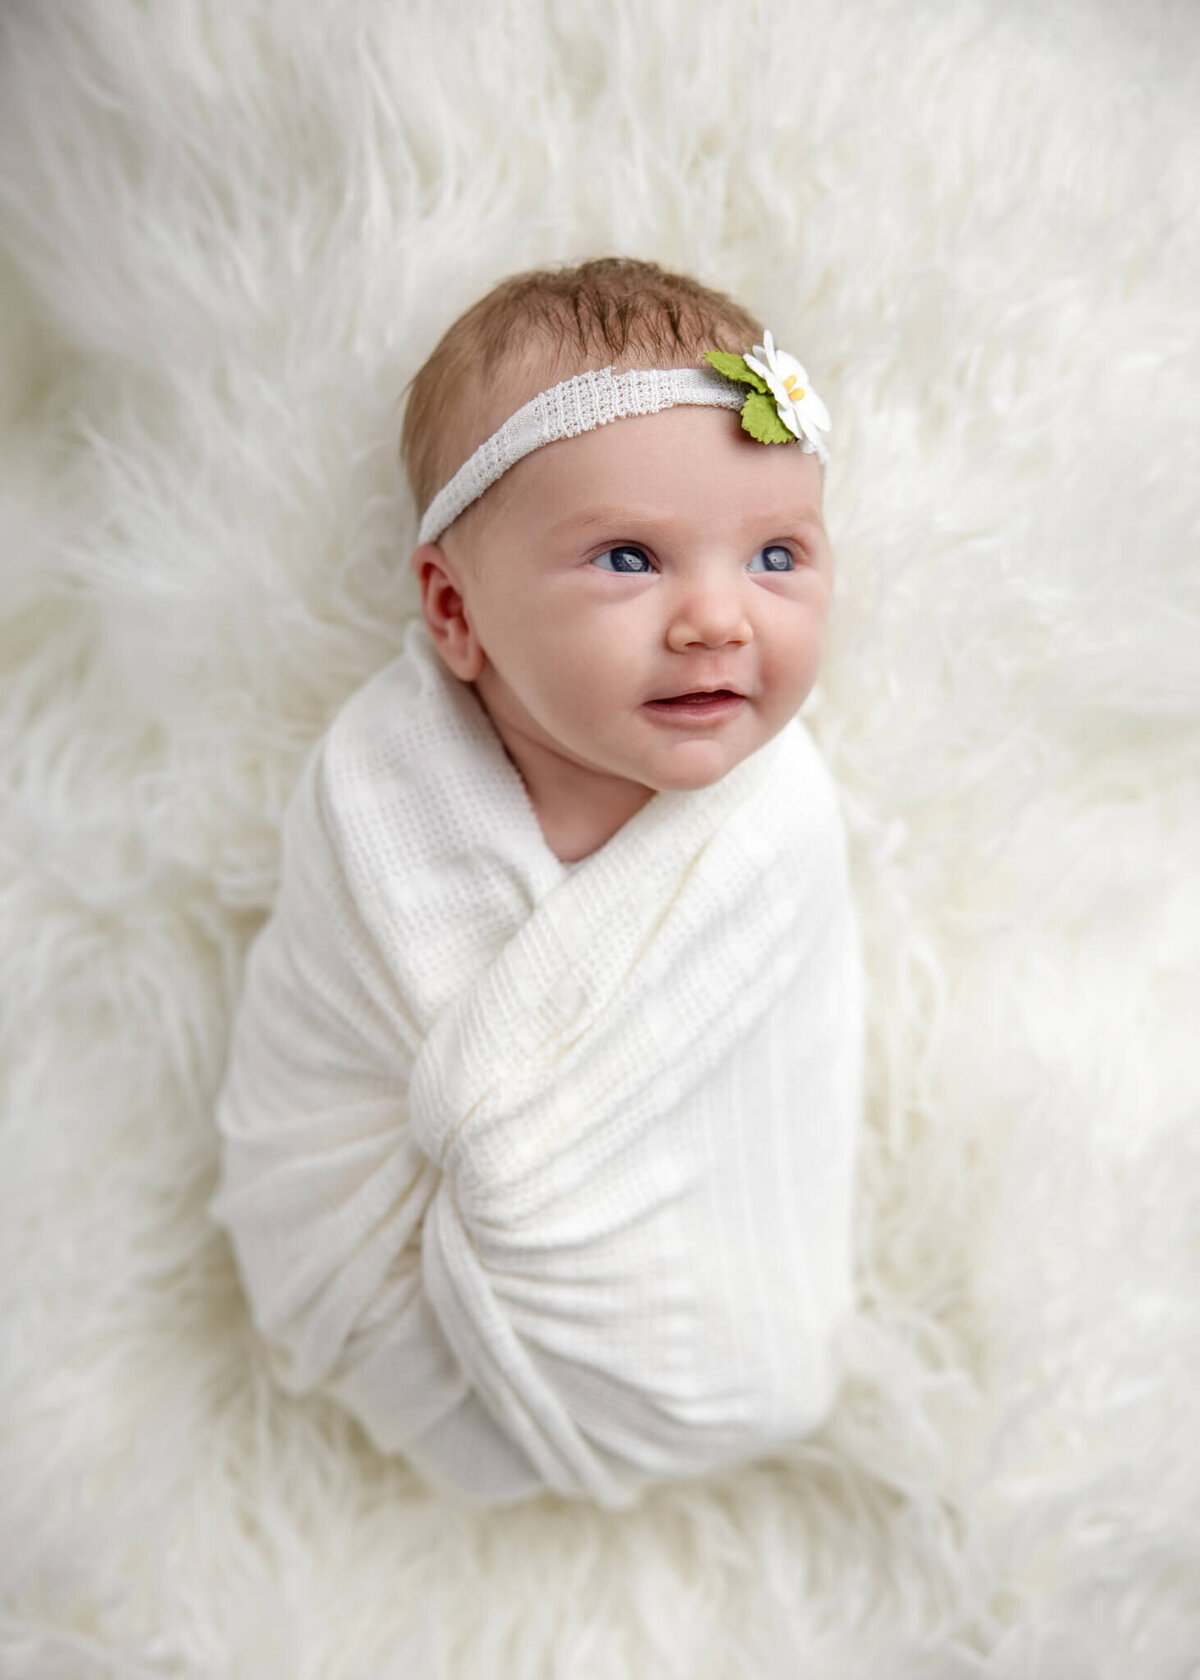 smiling newborn baby wrapped in white fabric wearing a white floral headband laying on a white shaggy rug